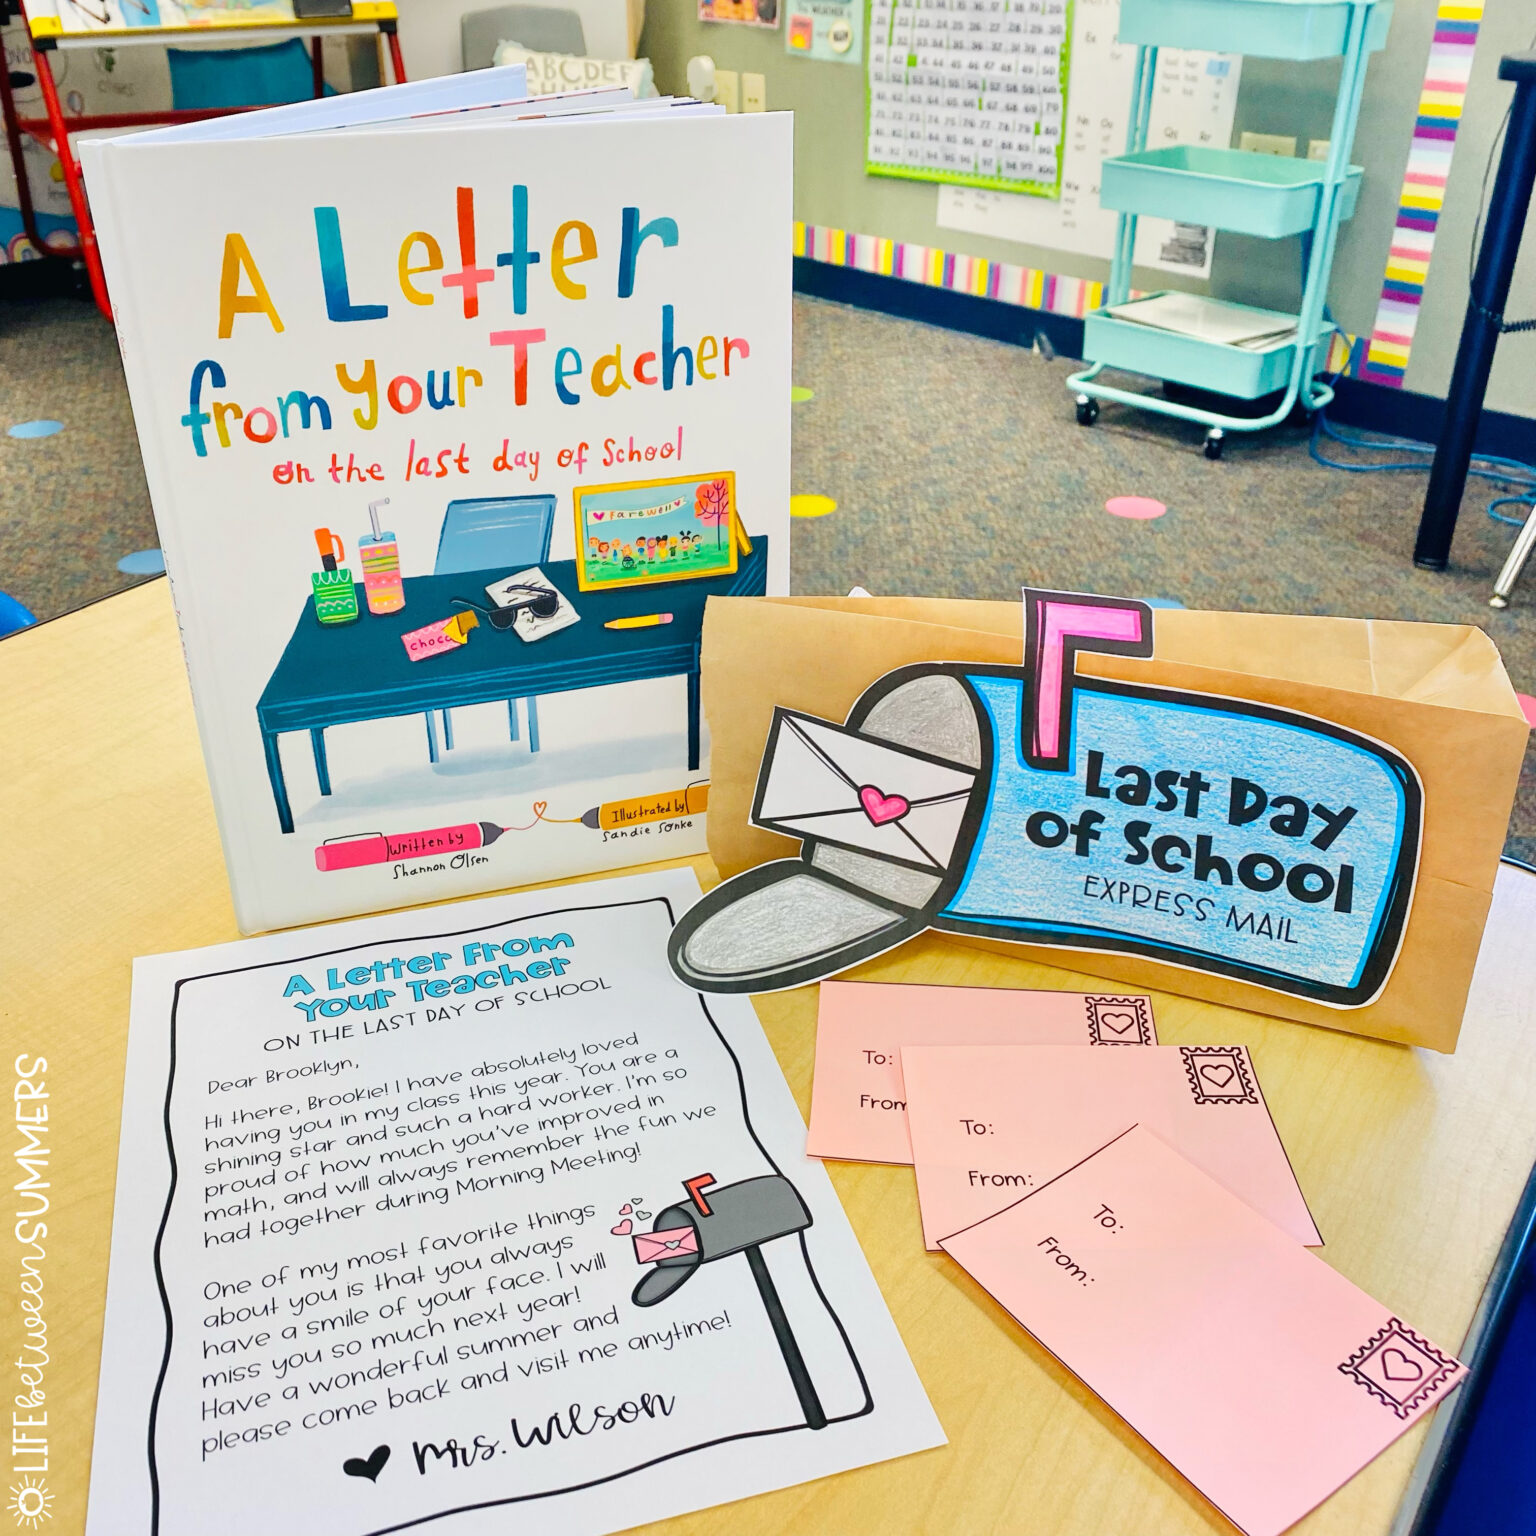 A book called "A Letter From Your Teacher on the Last Day of School" with a letter, notes, and a mailbox craft made from a paper bag